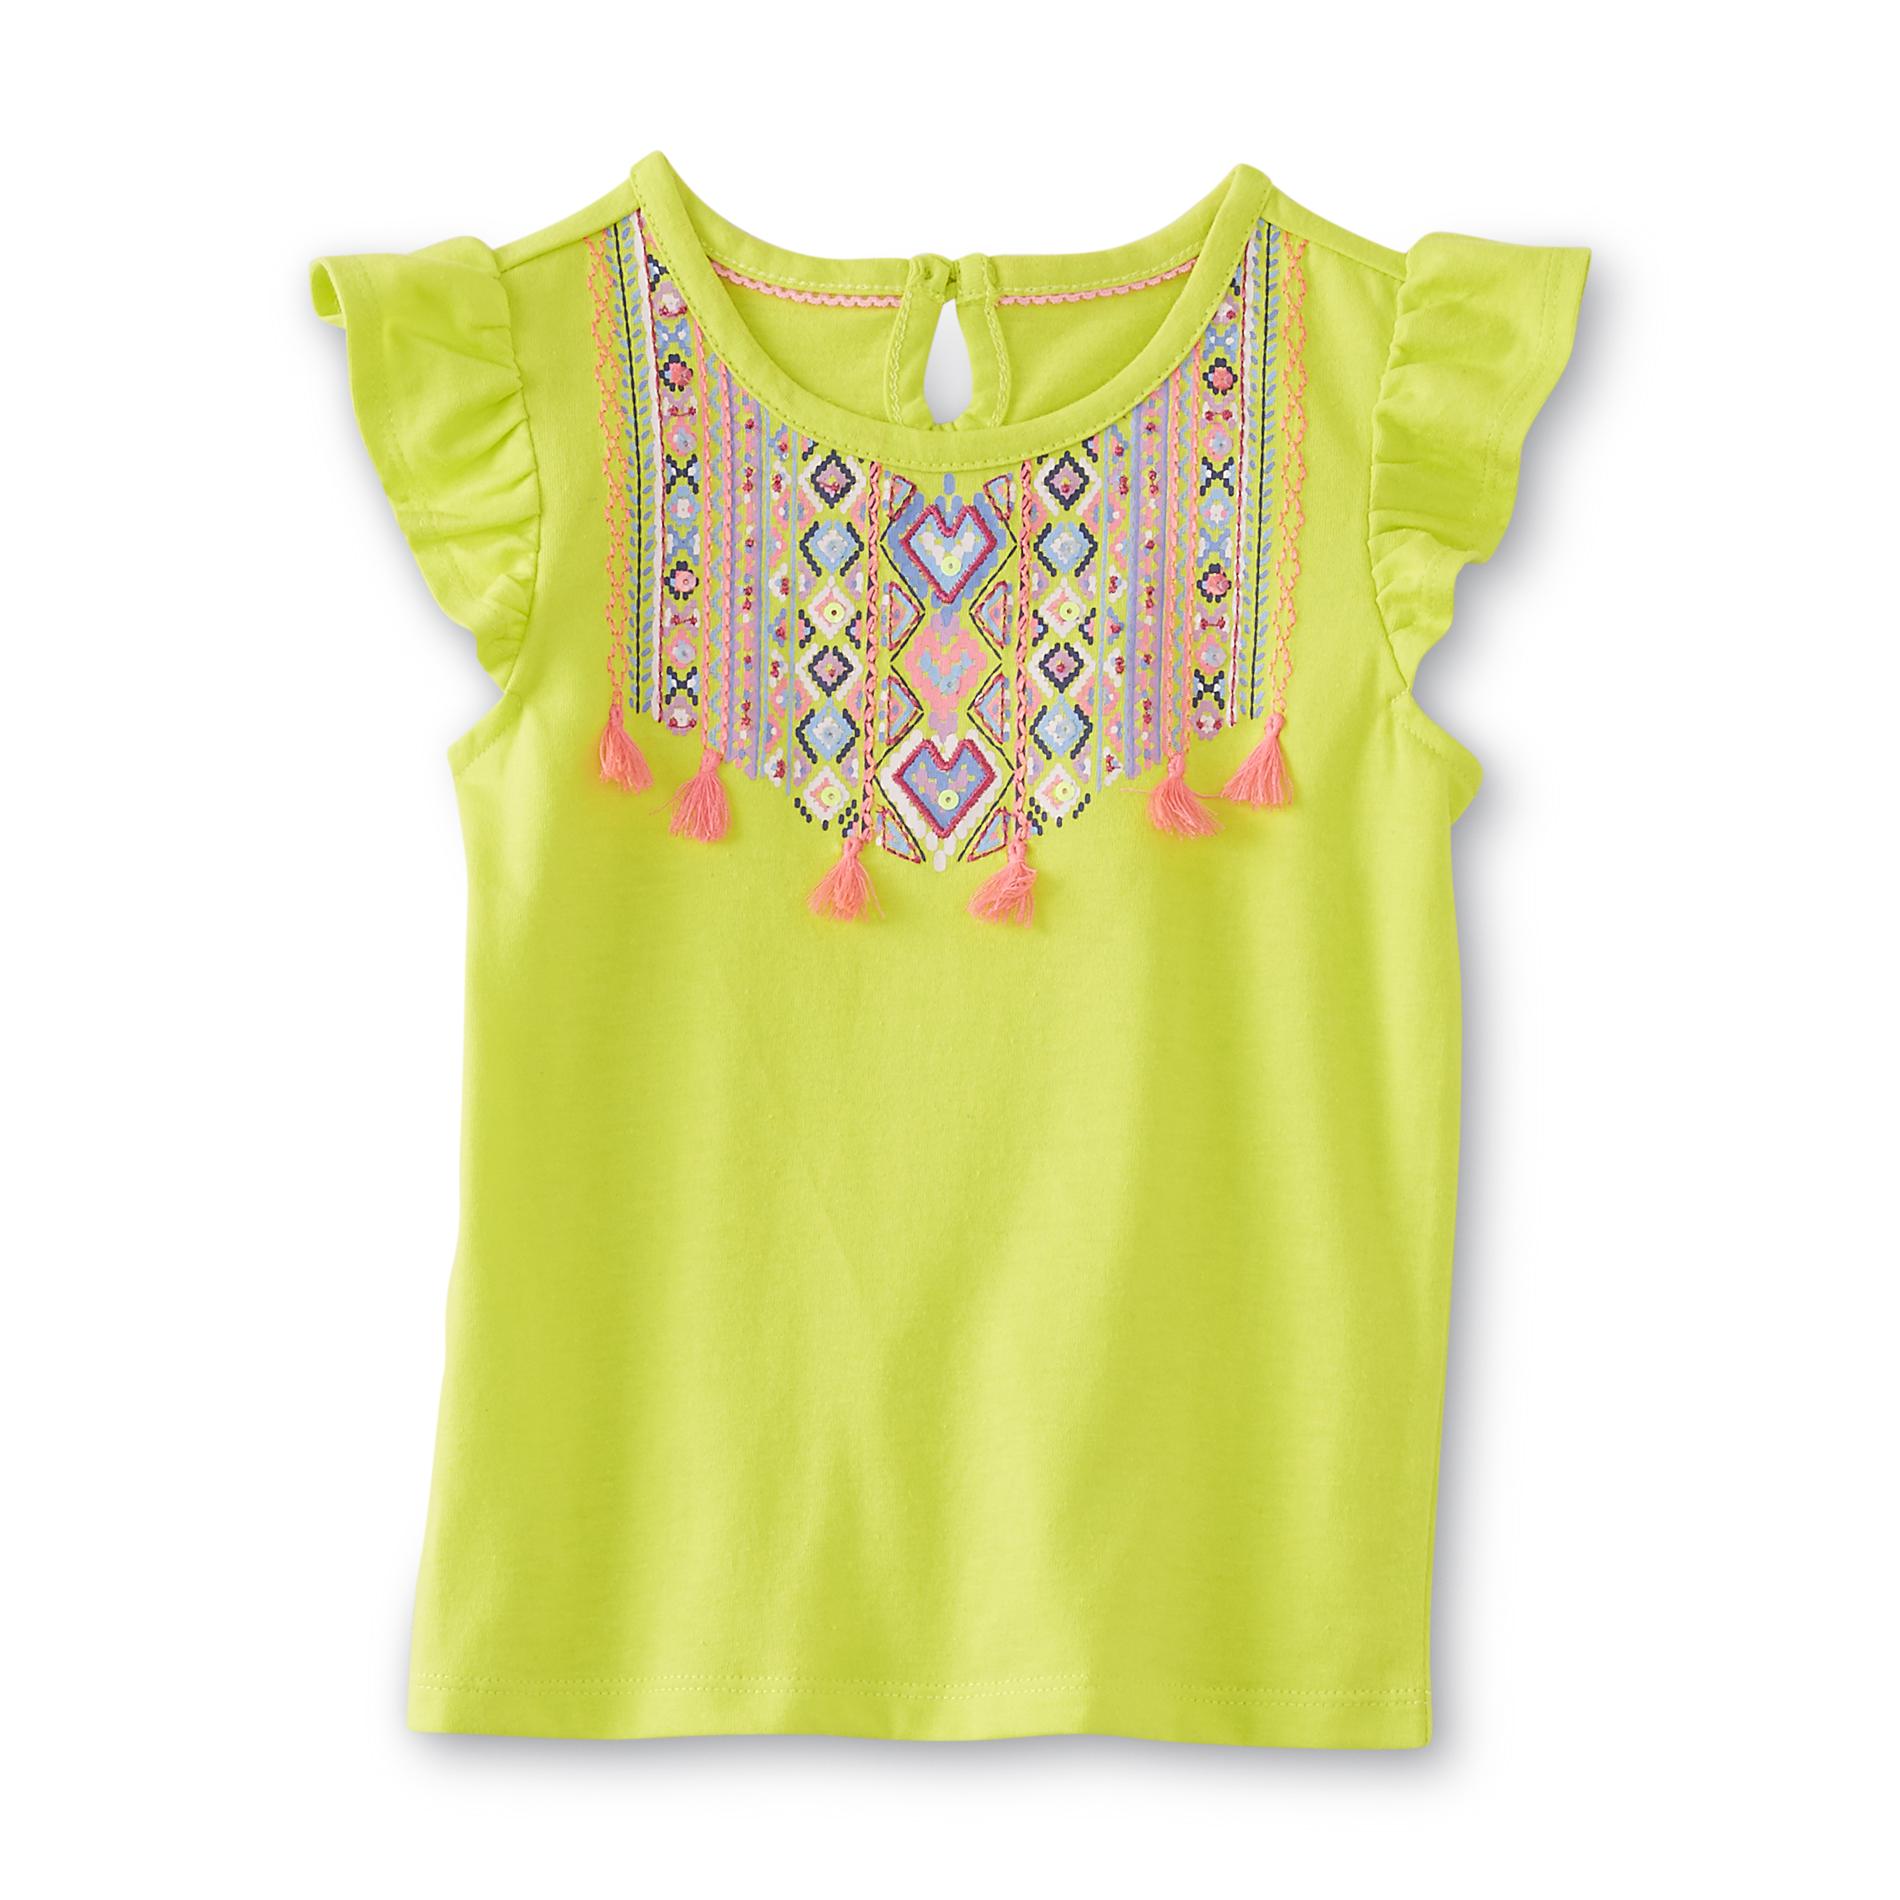 Route 66 Baby Infant & Toddler Girl's Embroidered Flutter Sleeve Top - Tribal